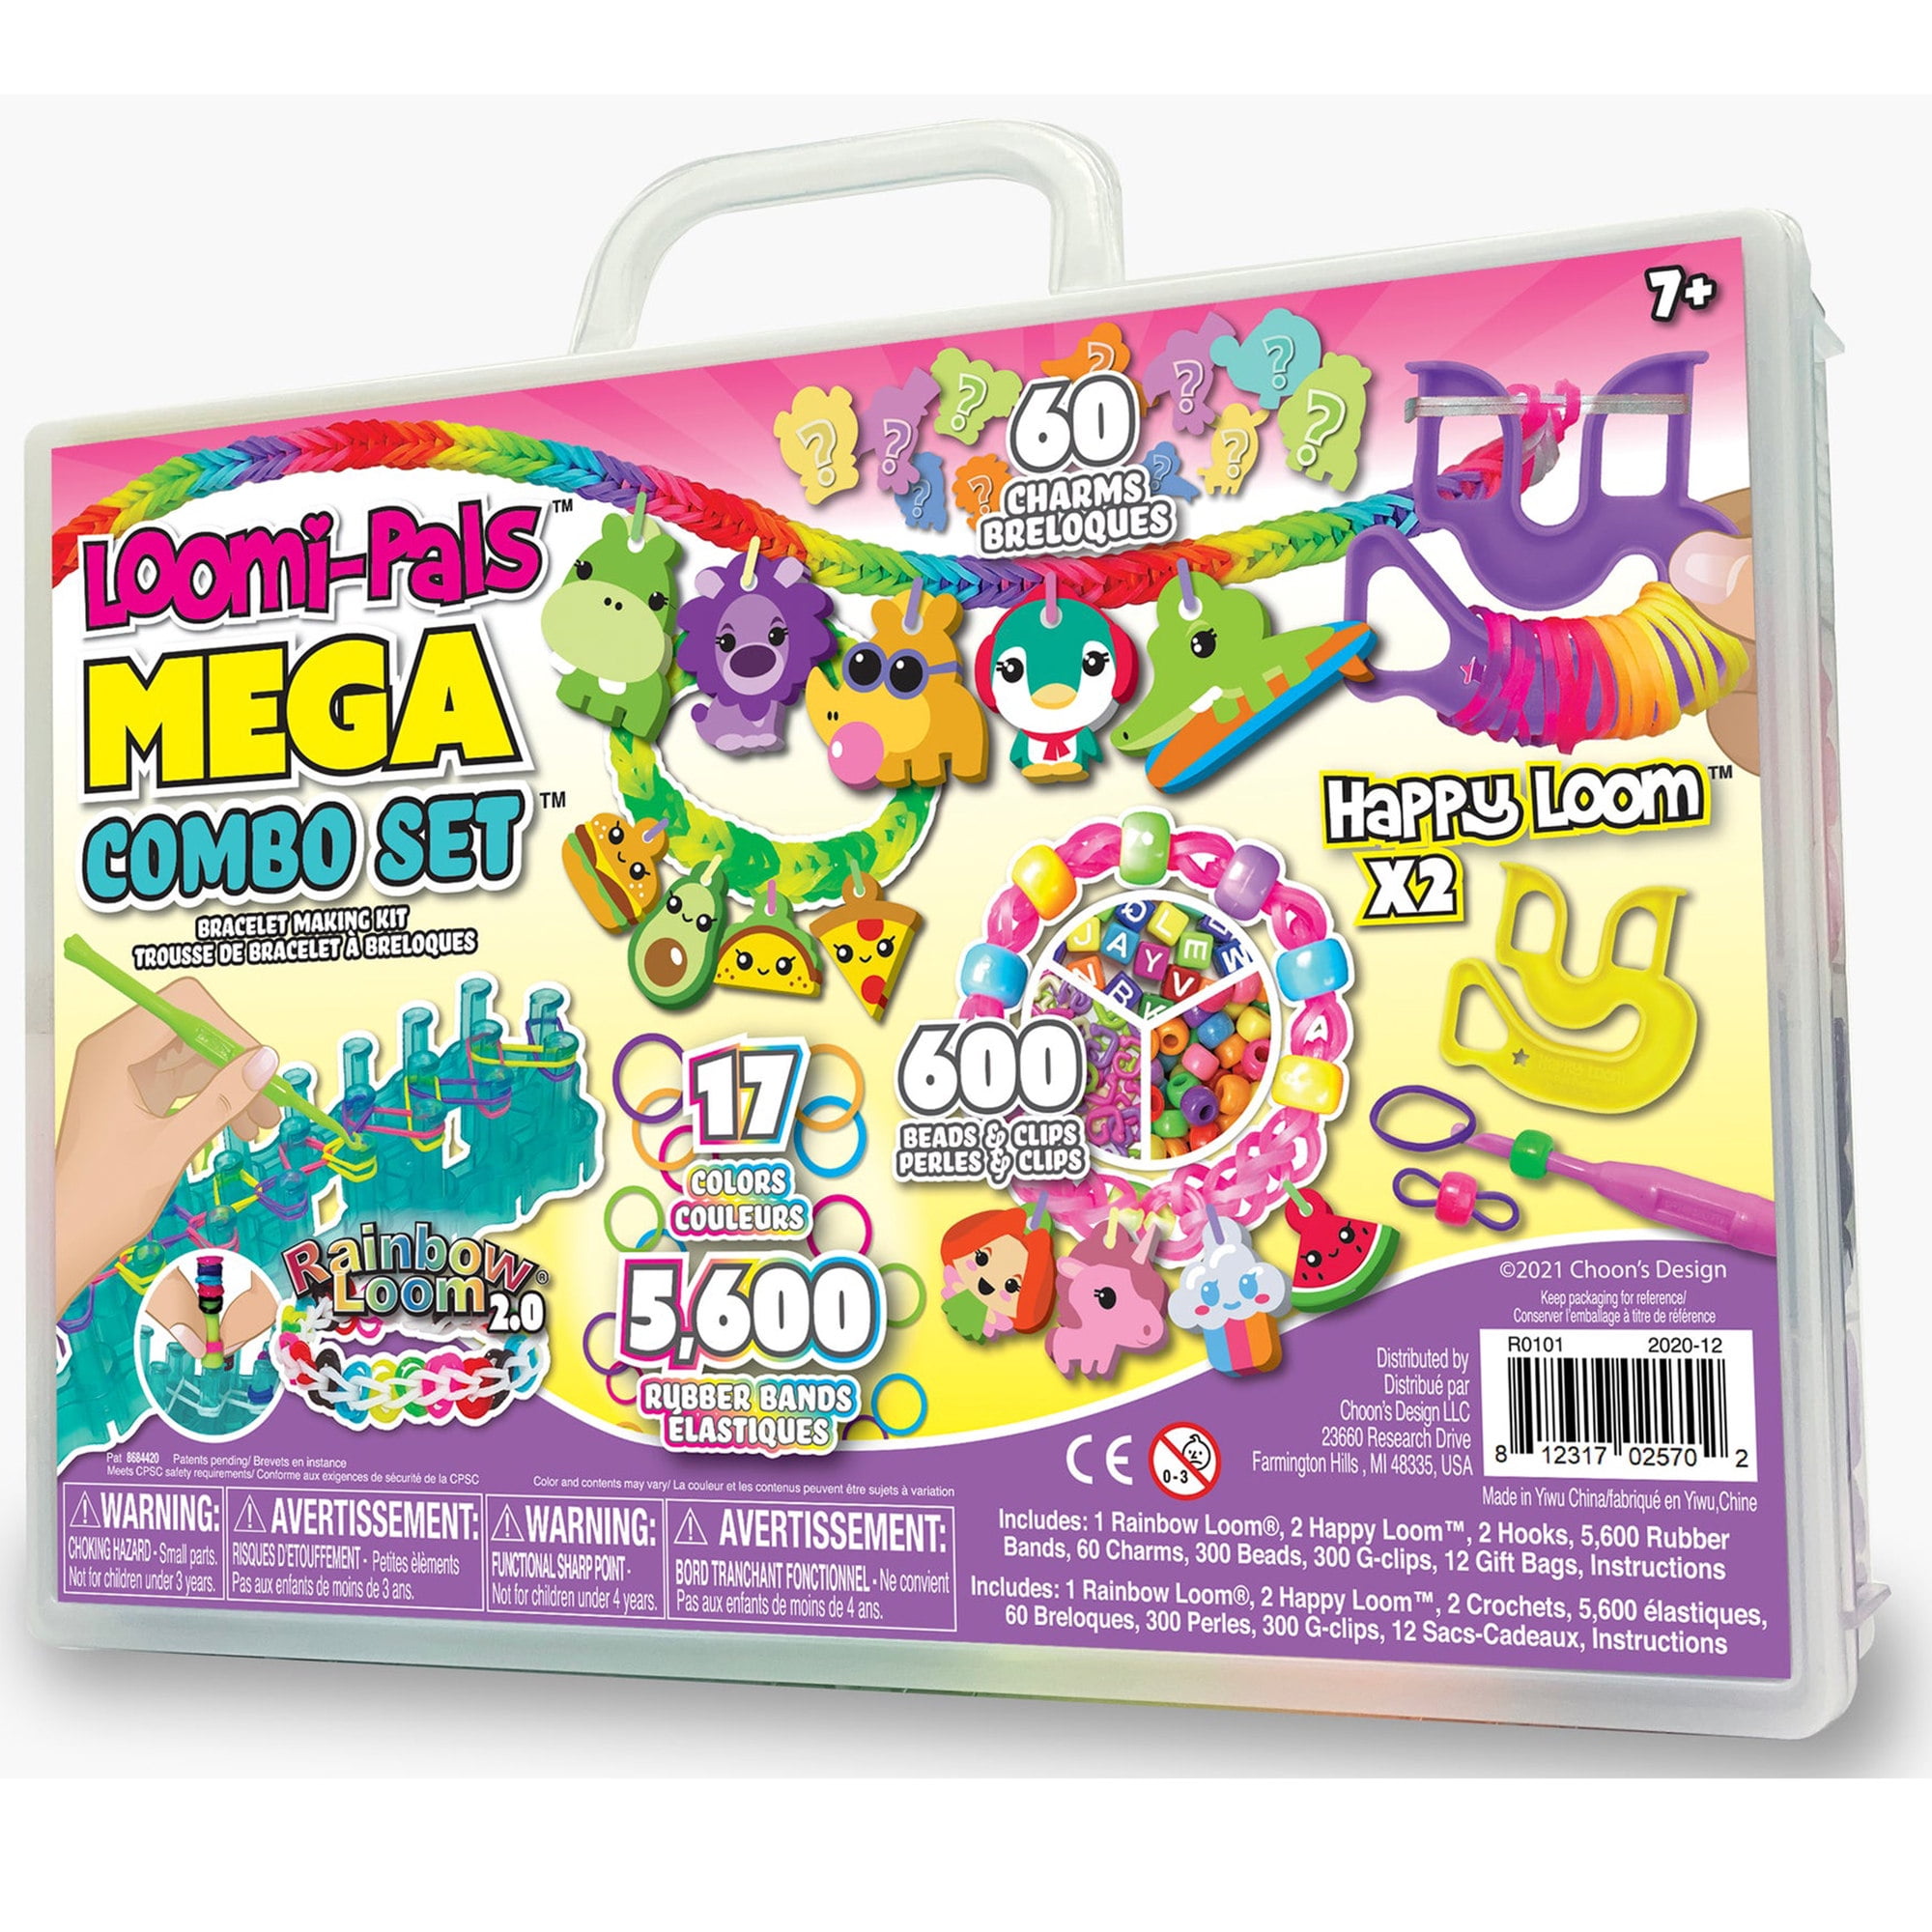 Rainbow Loom Mega Combo Set - Creative Play Kit with 7,000 Rubber Bands,  C-Clips, Carrying Case, and Gift Bags in the Kids Play Toys department at